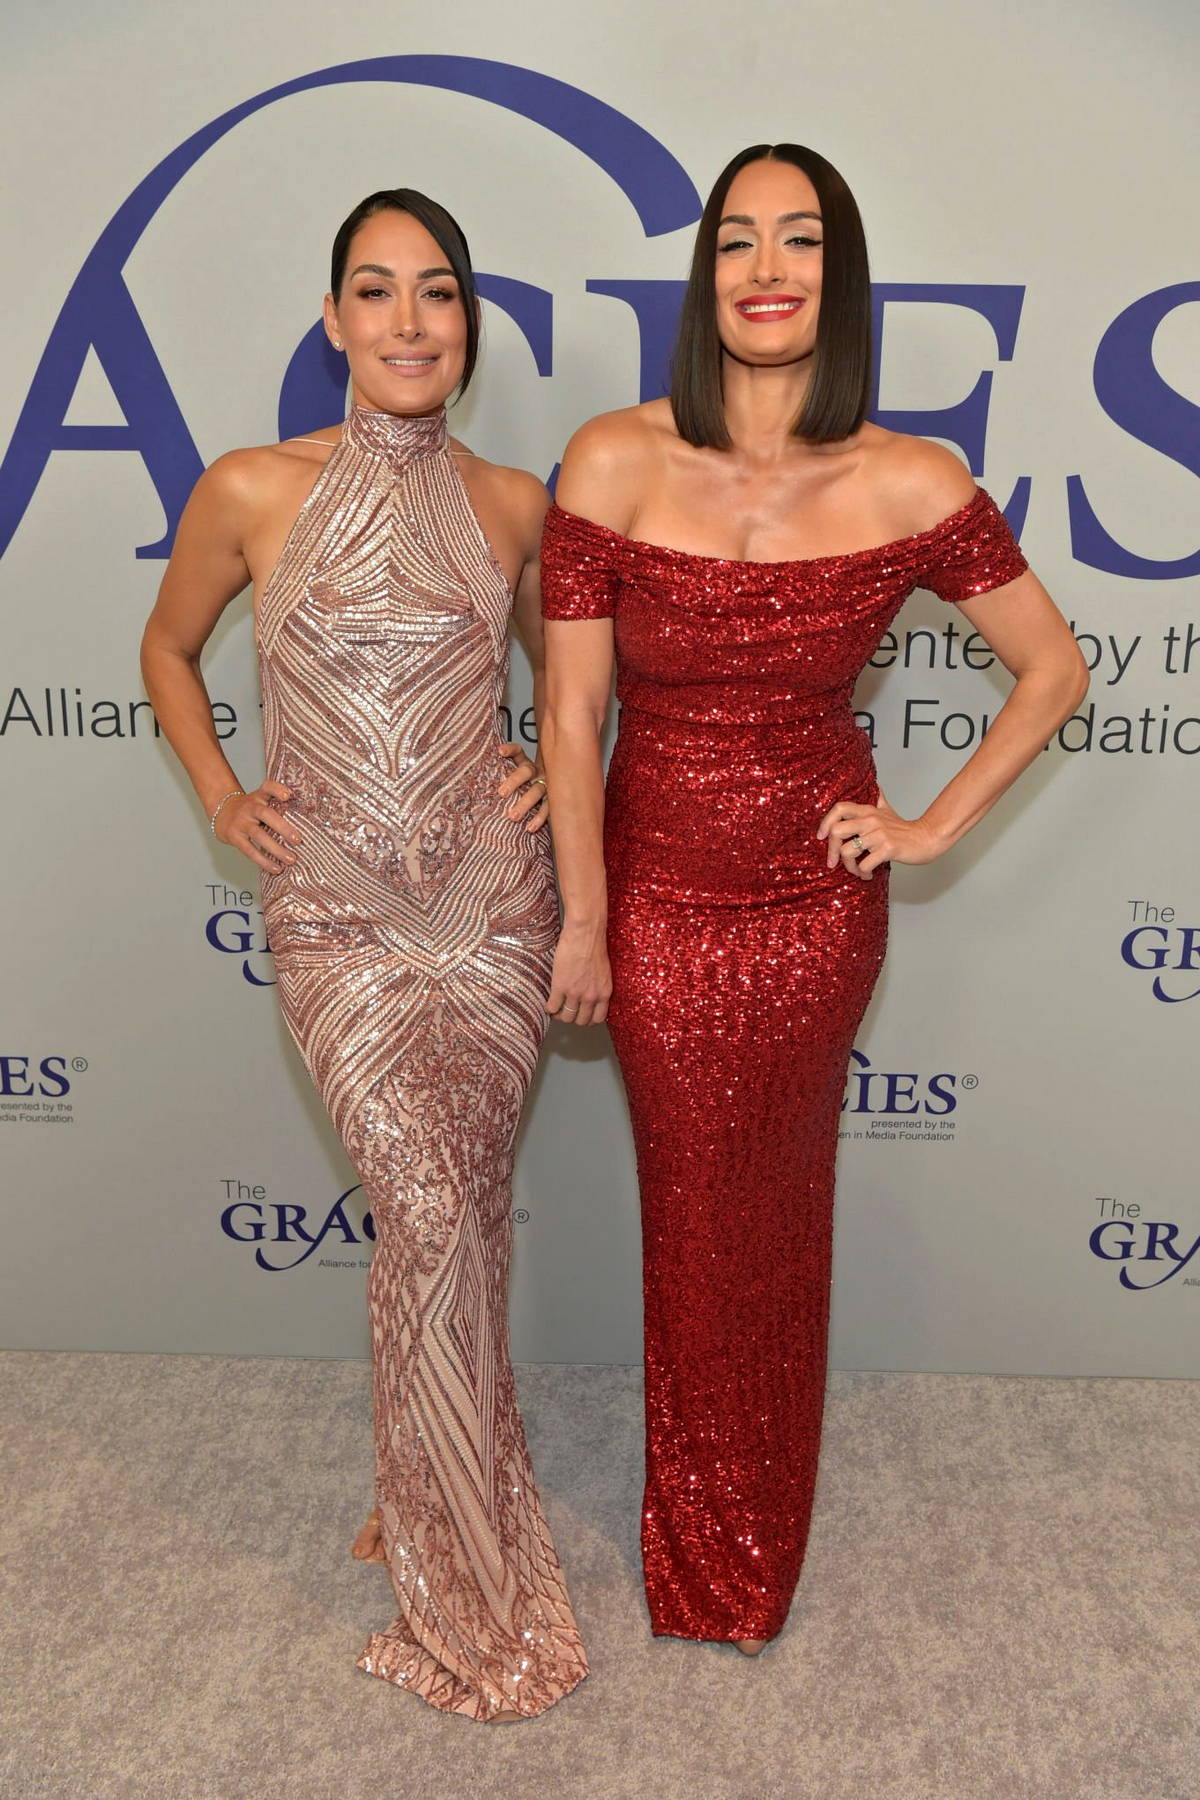 Nikki Bella And Brie Bella Attend The 47th Annual Gracie Awards Gala In Beverly Hills California